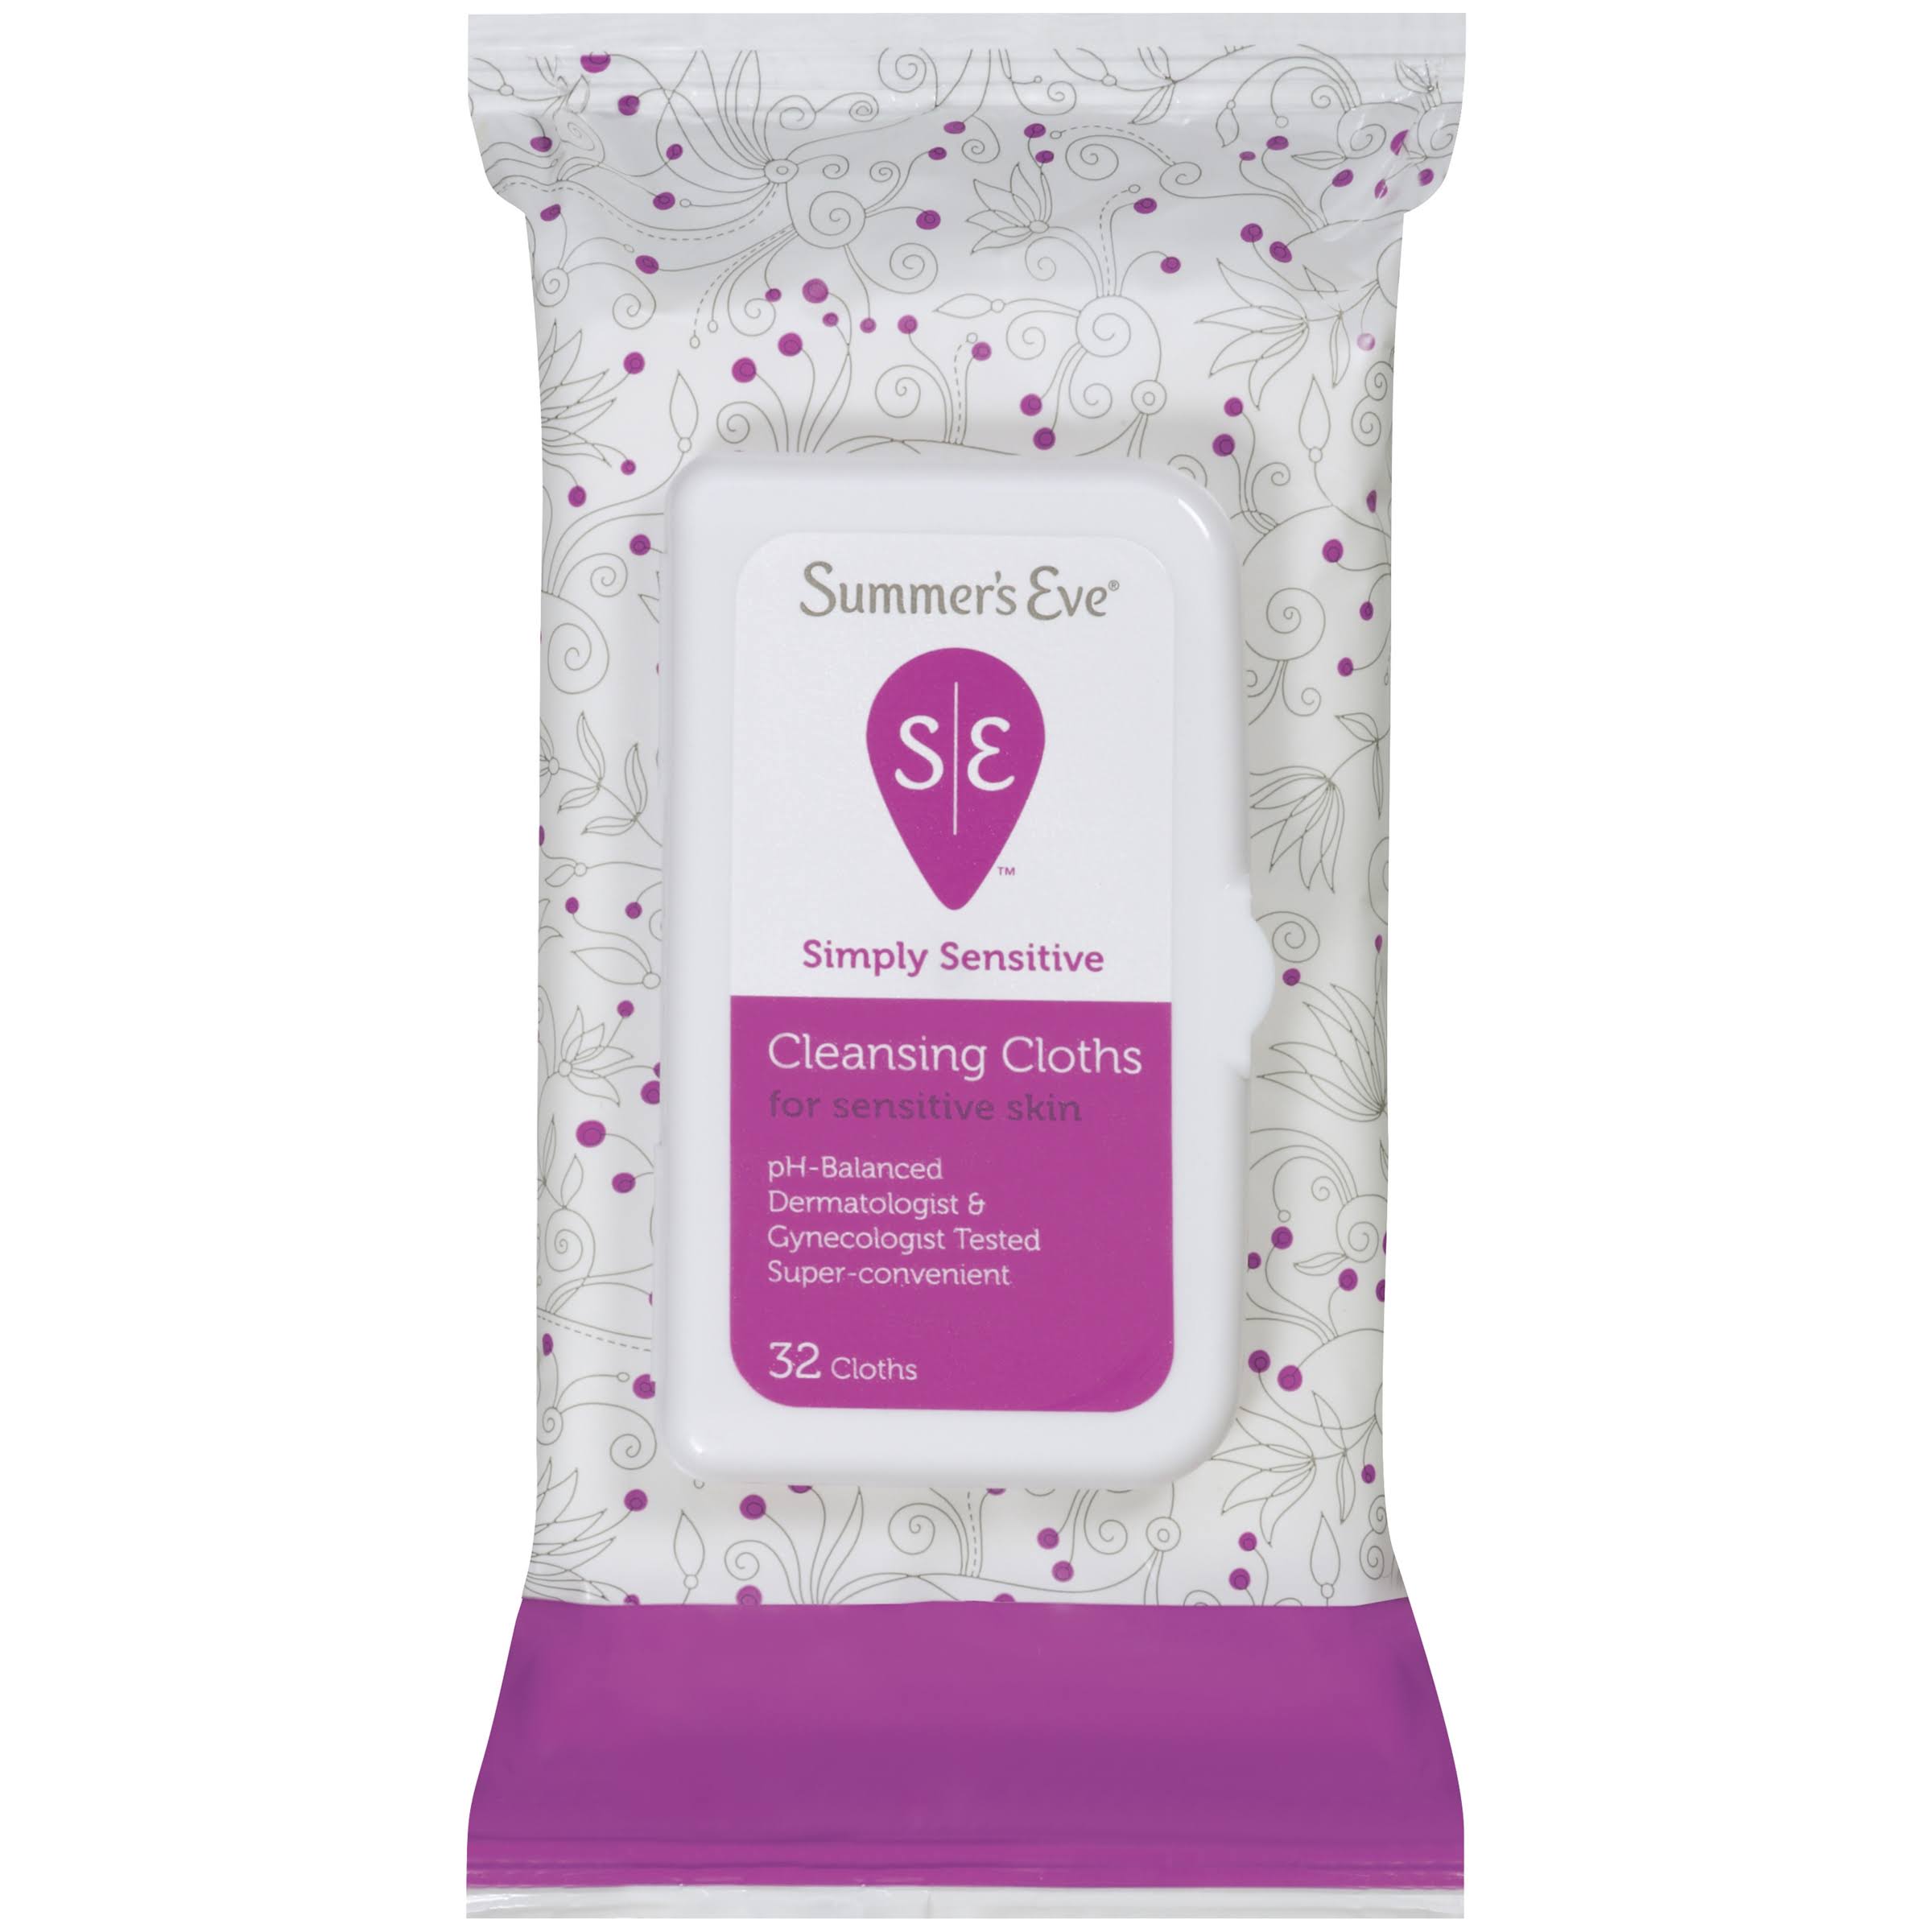 Summer's Eve Simply Sensitive Cleansing Cloths - 32 Pack